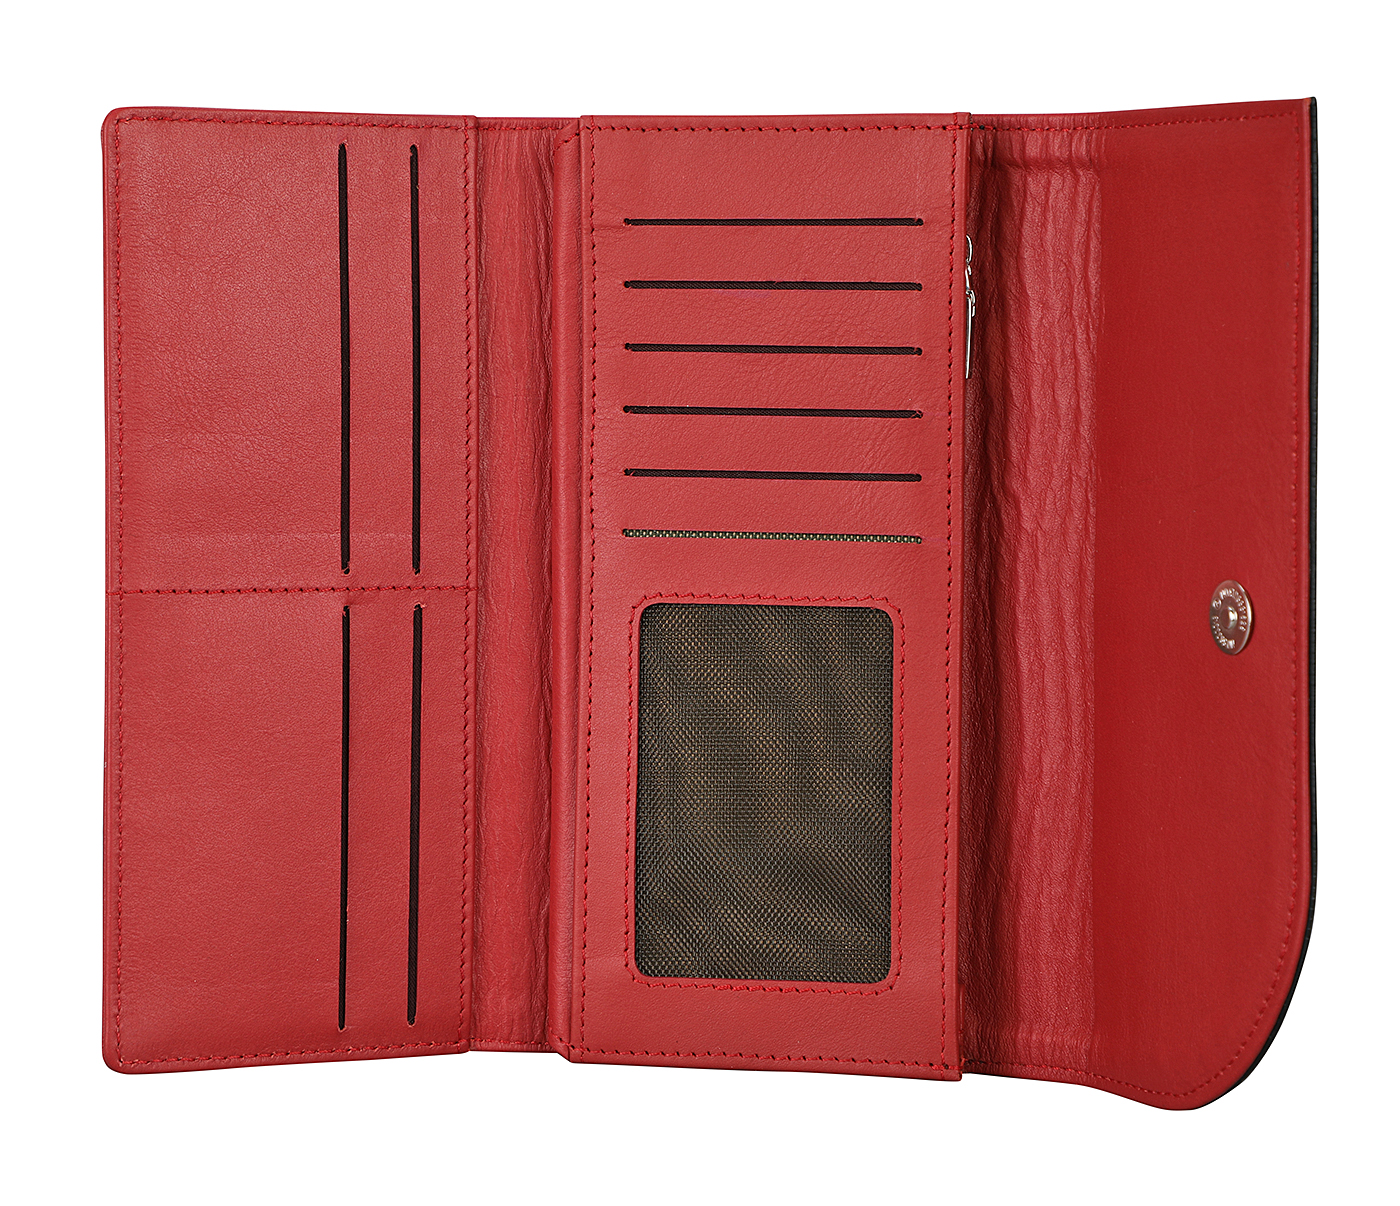 Wallet-Evelyn-Womens wallet in Genuine Leather - Black/Red